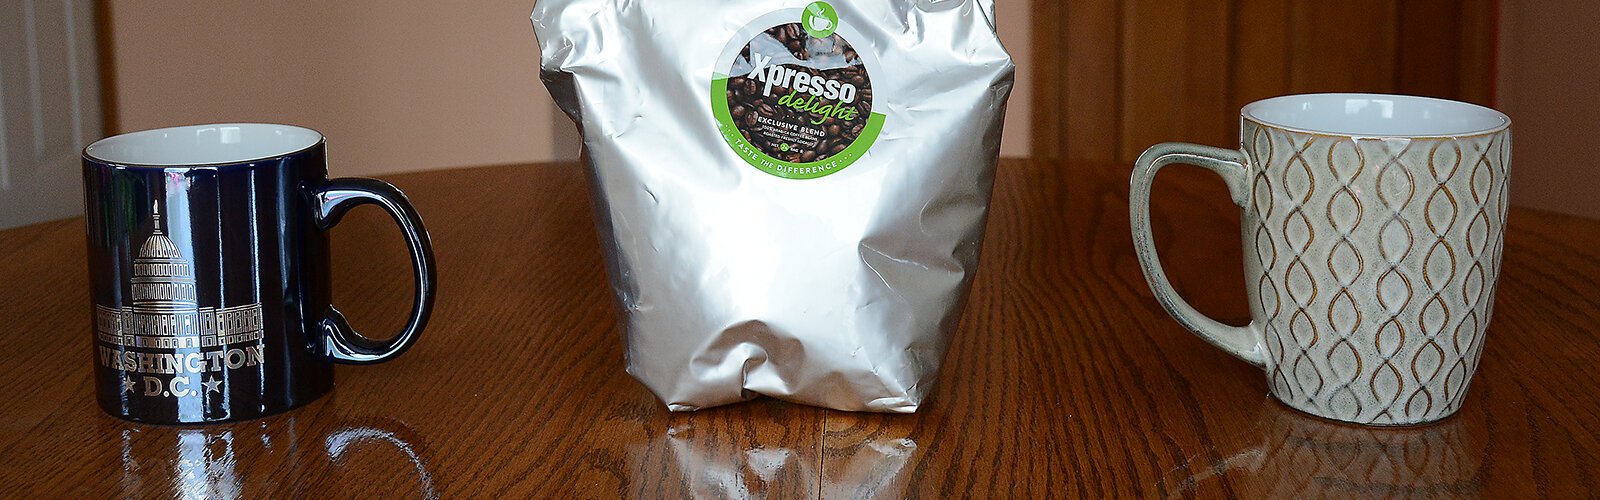 The Xpresso Delight franchise delivers high-end gourmet coffee to businesses.